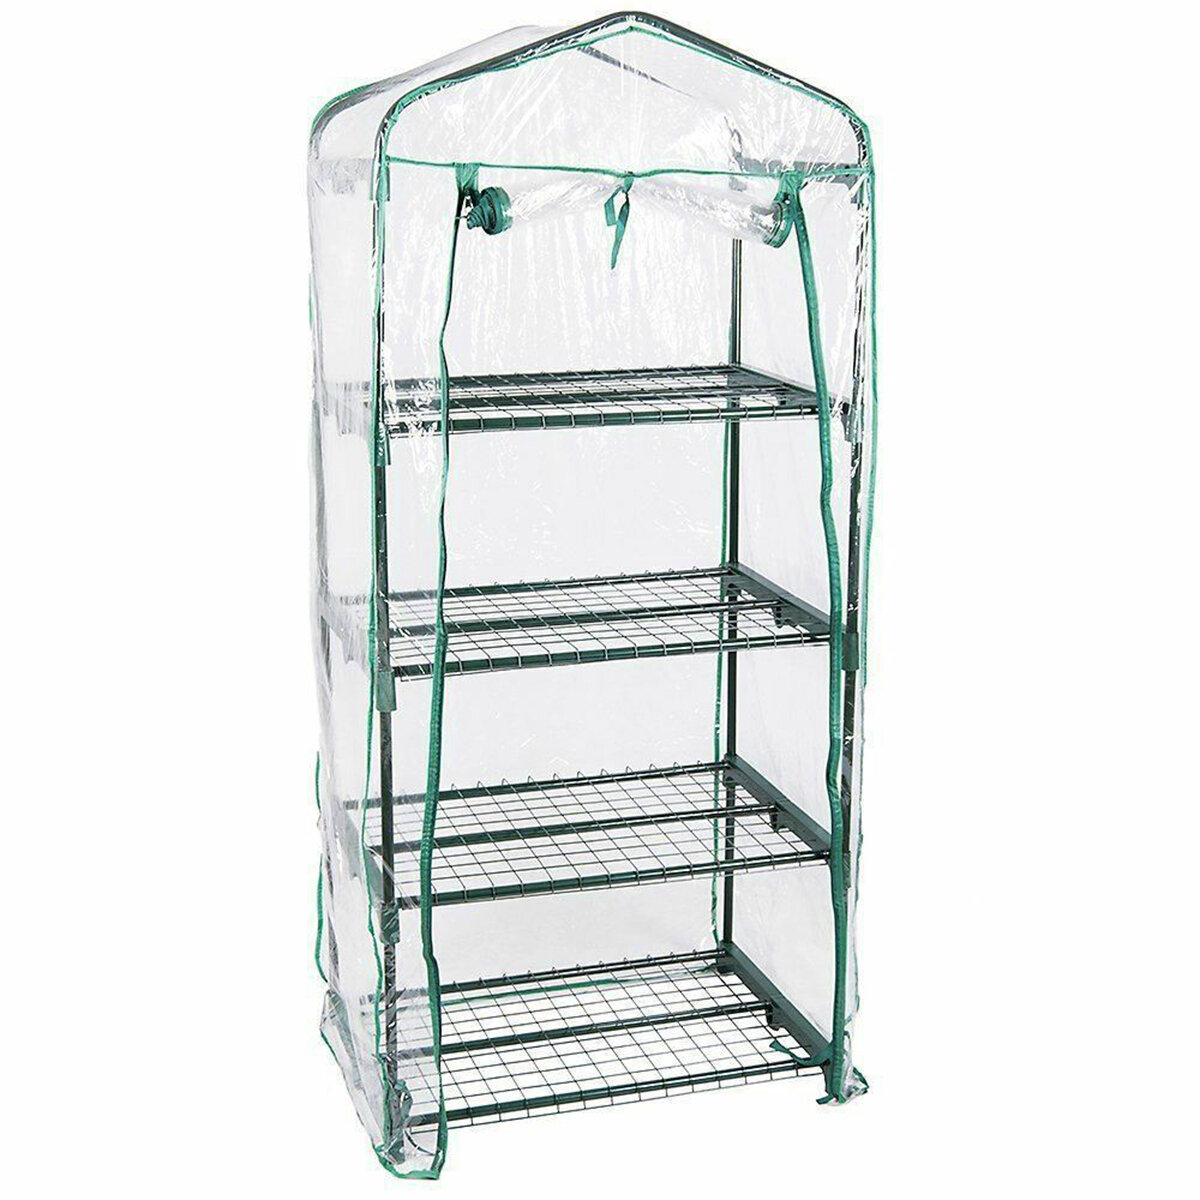 Mini Greenhouse Cover Clear PVC Outdoor Gardening Tier Plant Growing Green House